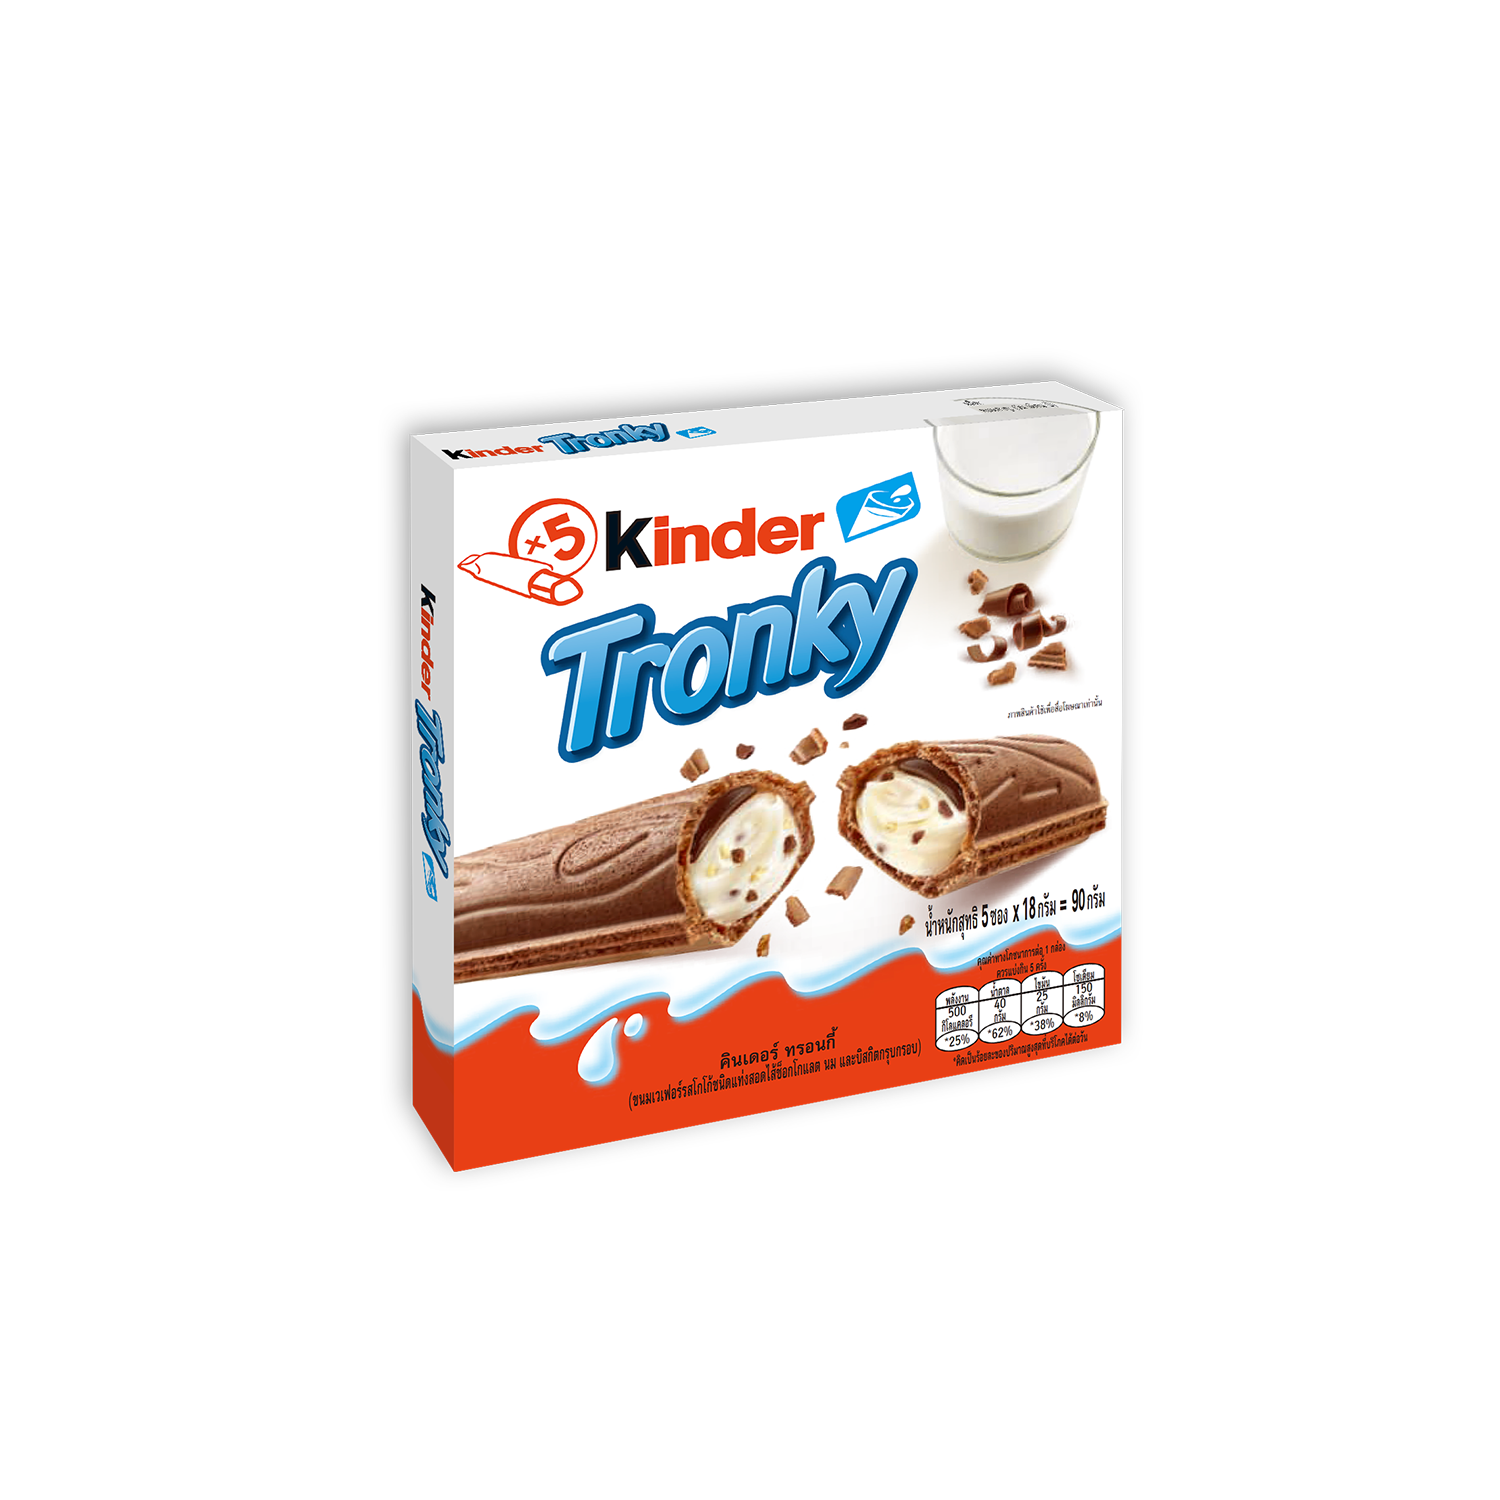 kinder-tronky-th-t5_front.png?t=1698641866